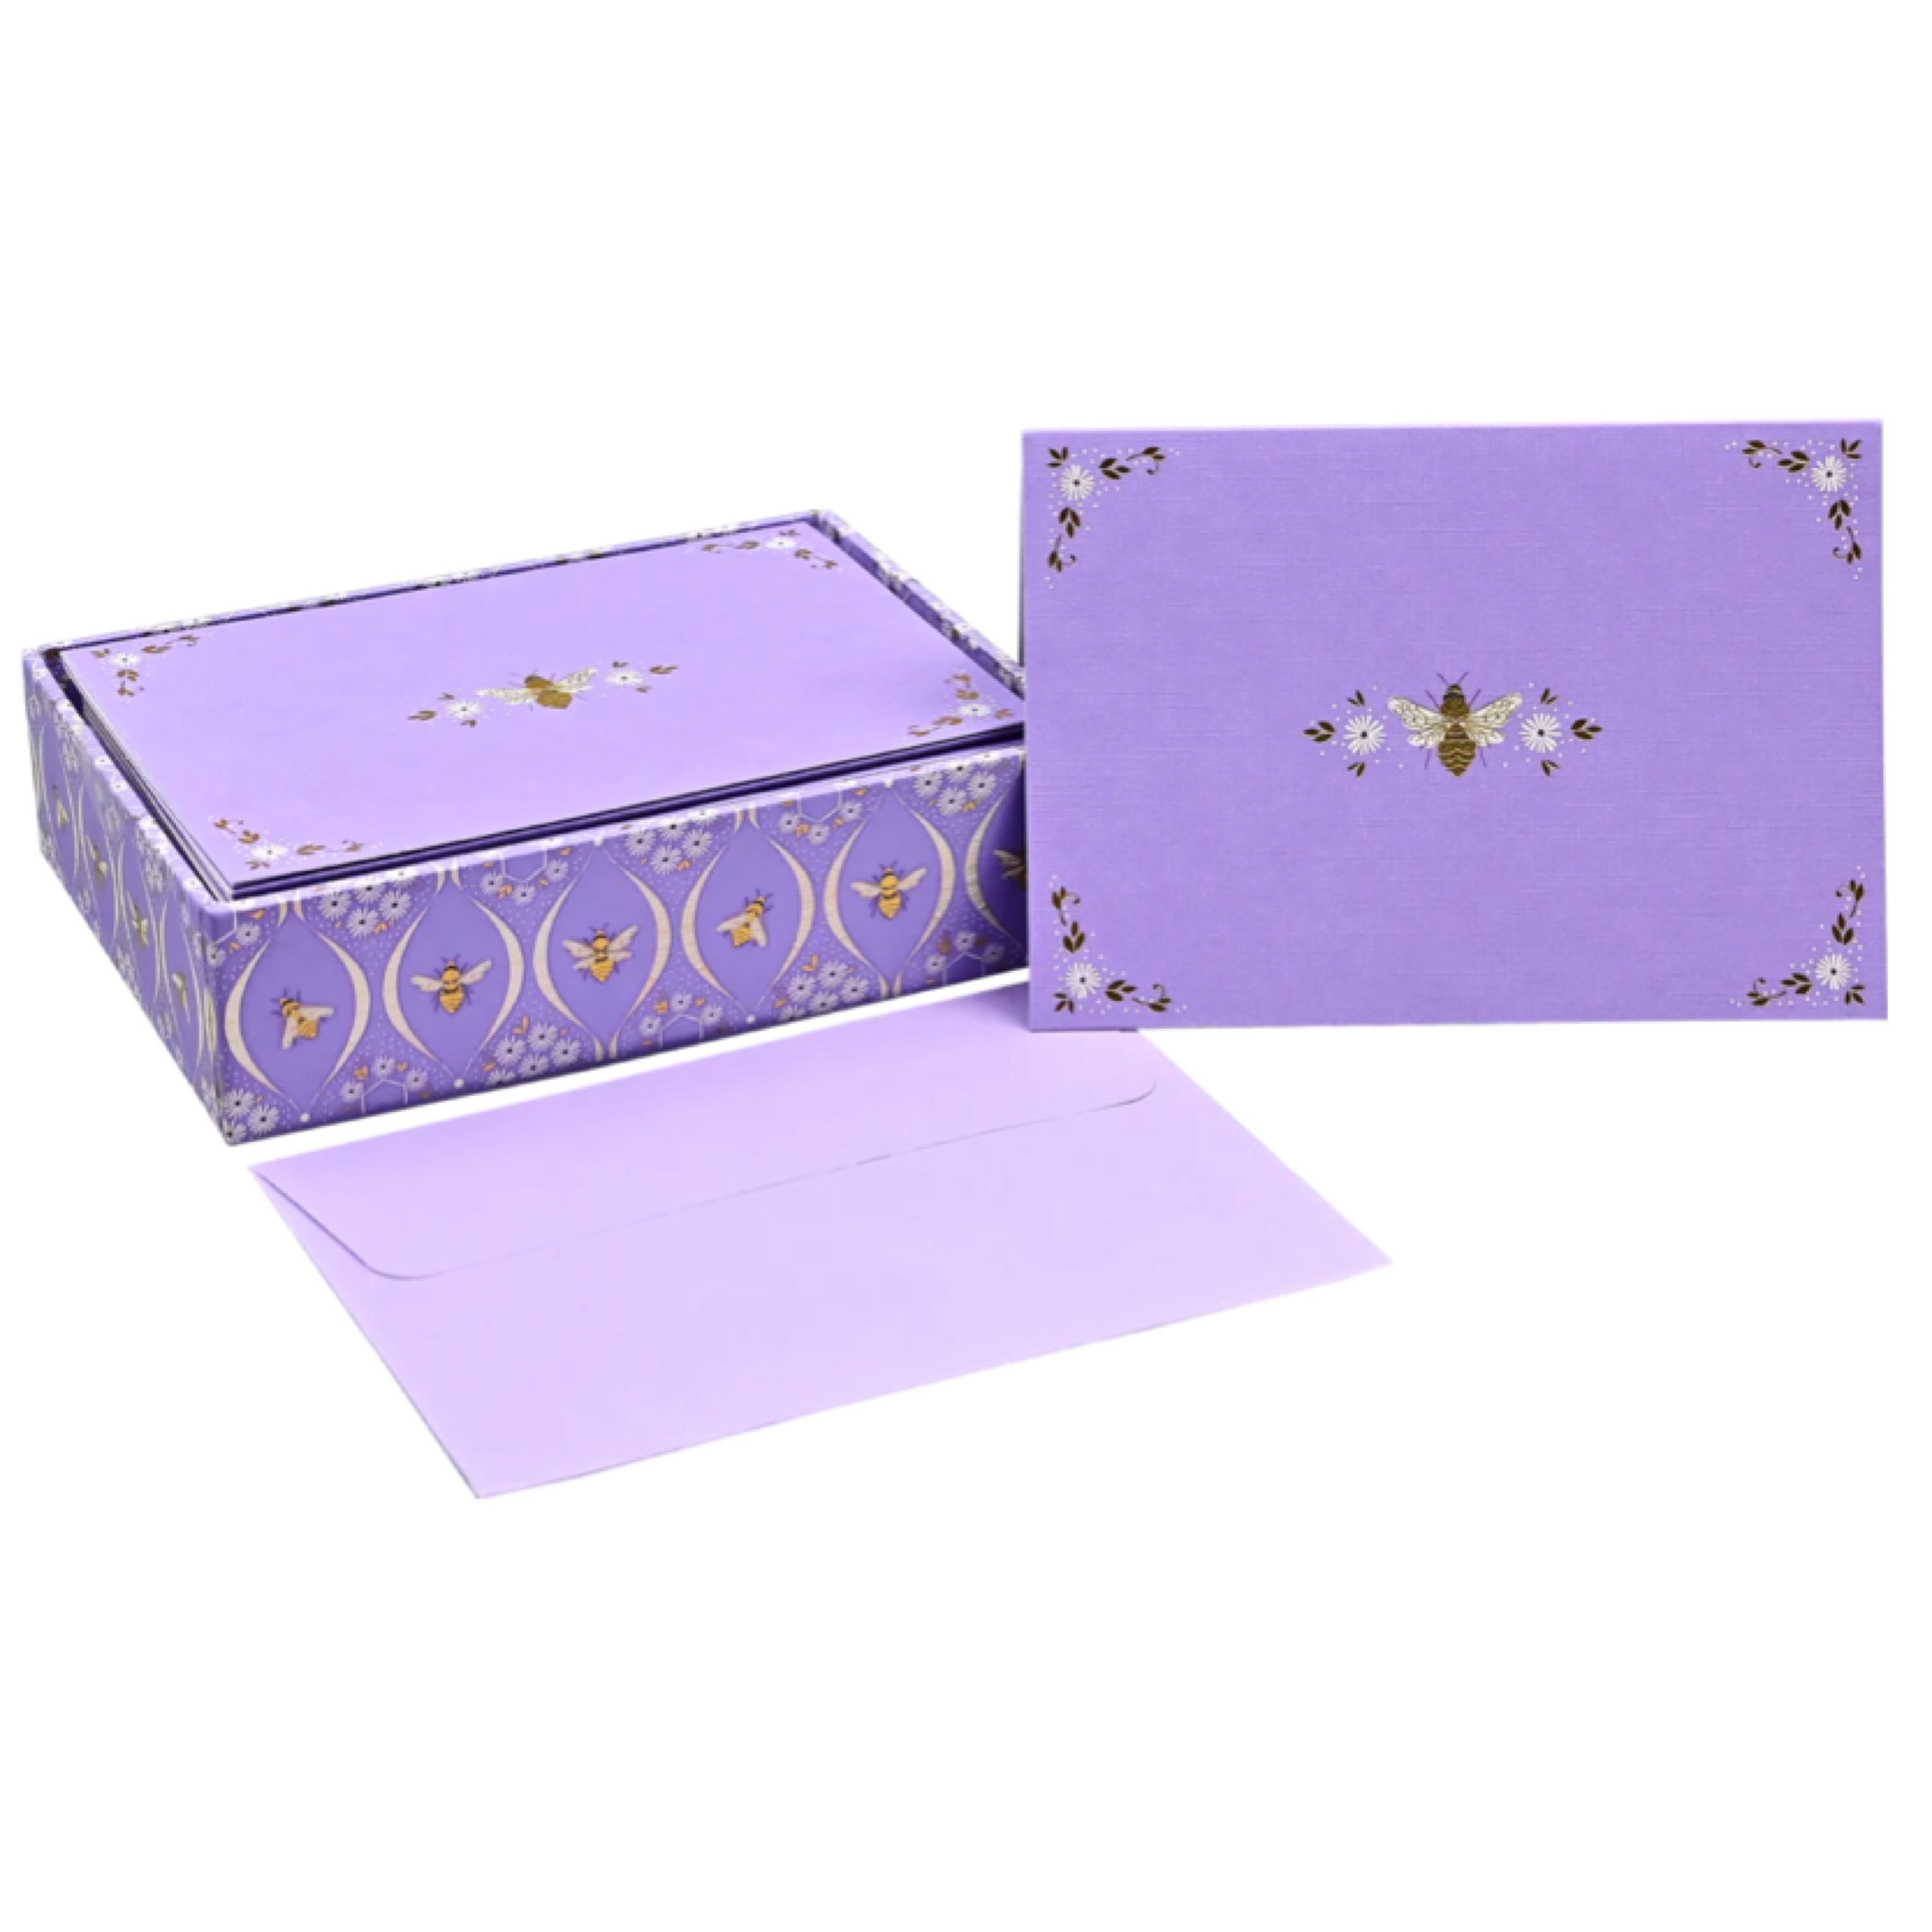 Peter Pauper Boxed Notes - Florentine Bees